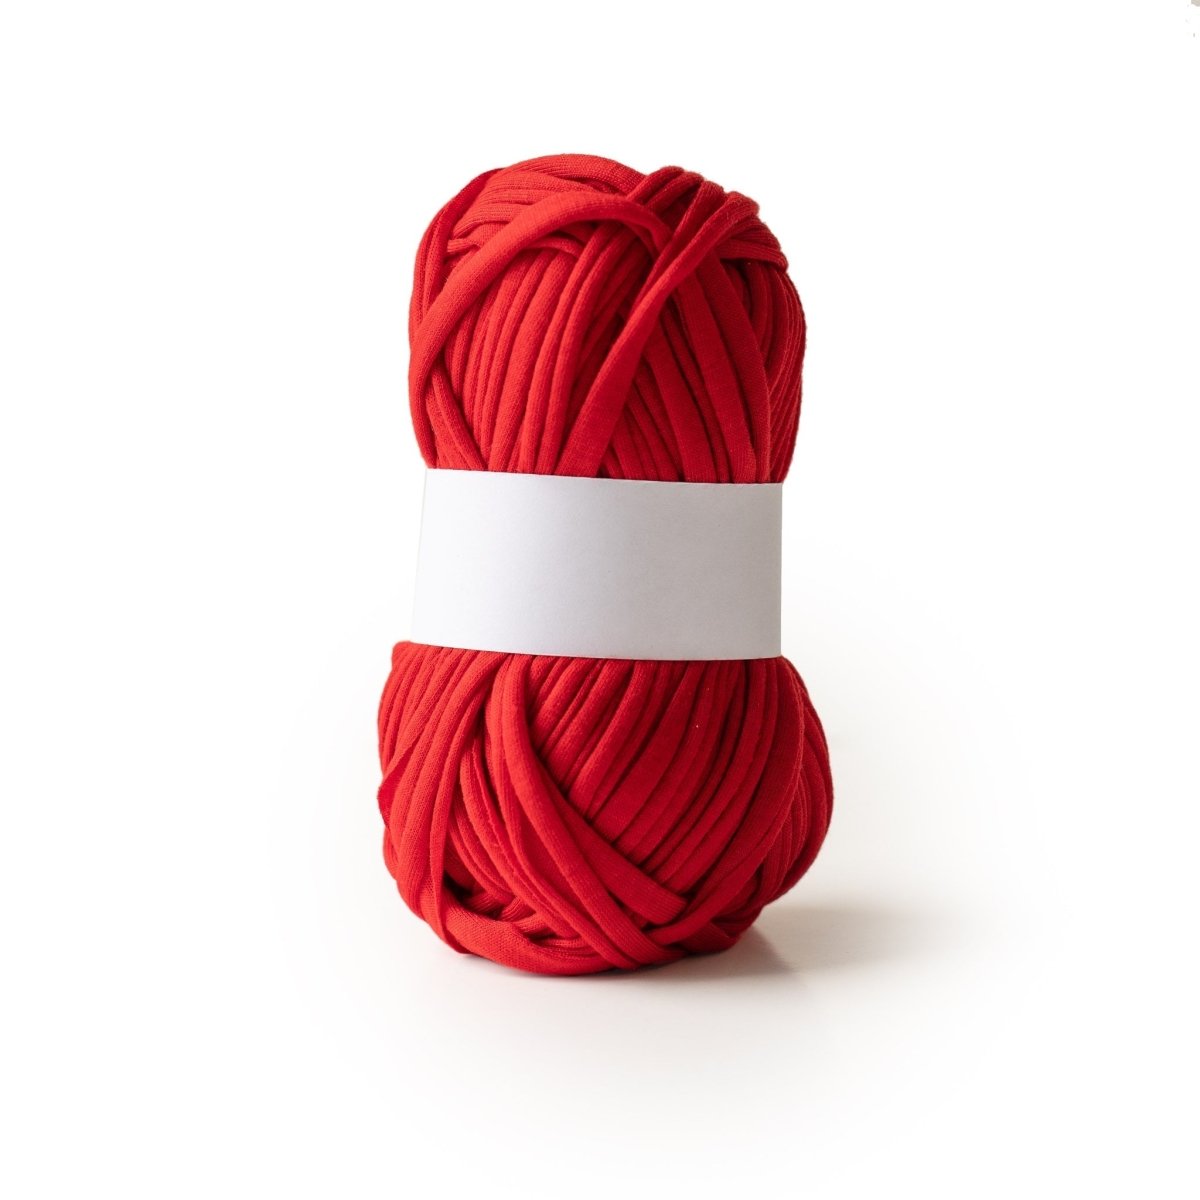 Cording Jersey T-Shirt Yarn Cherry Red from Cara & Co Craft Supply